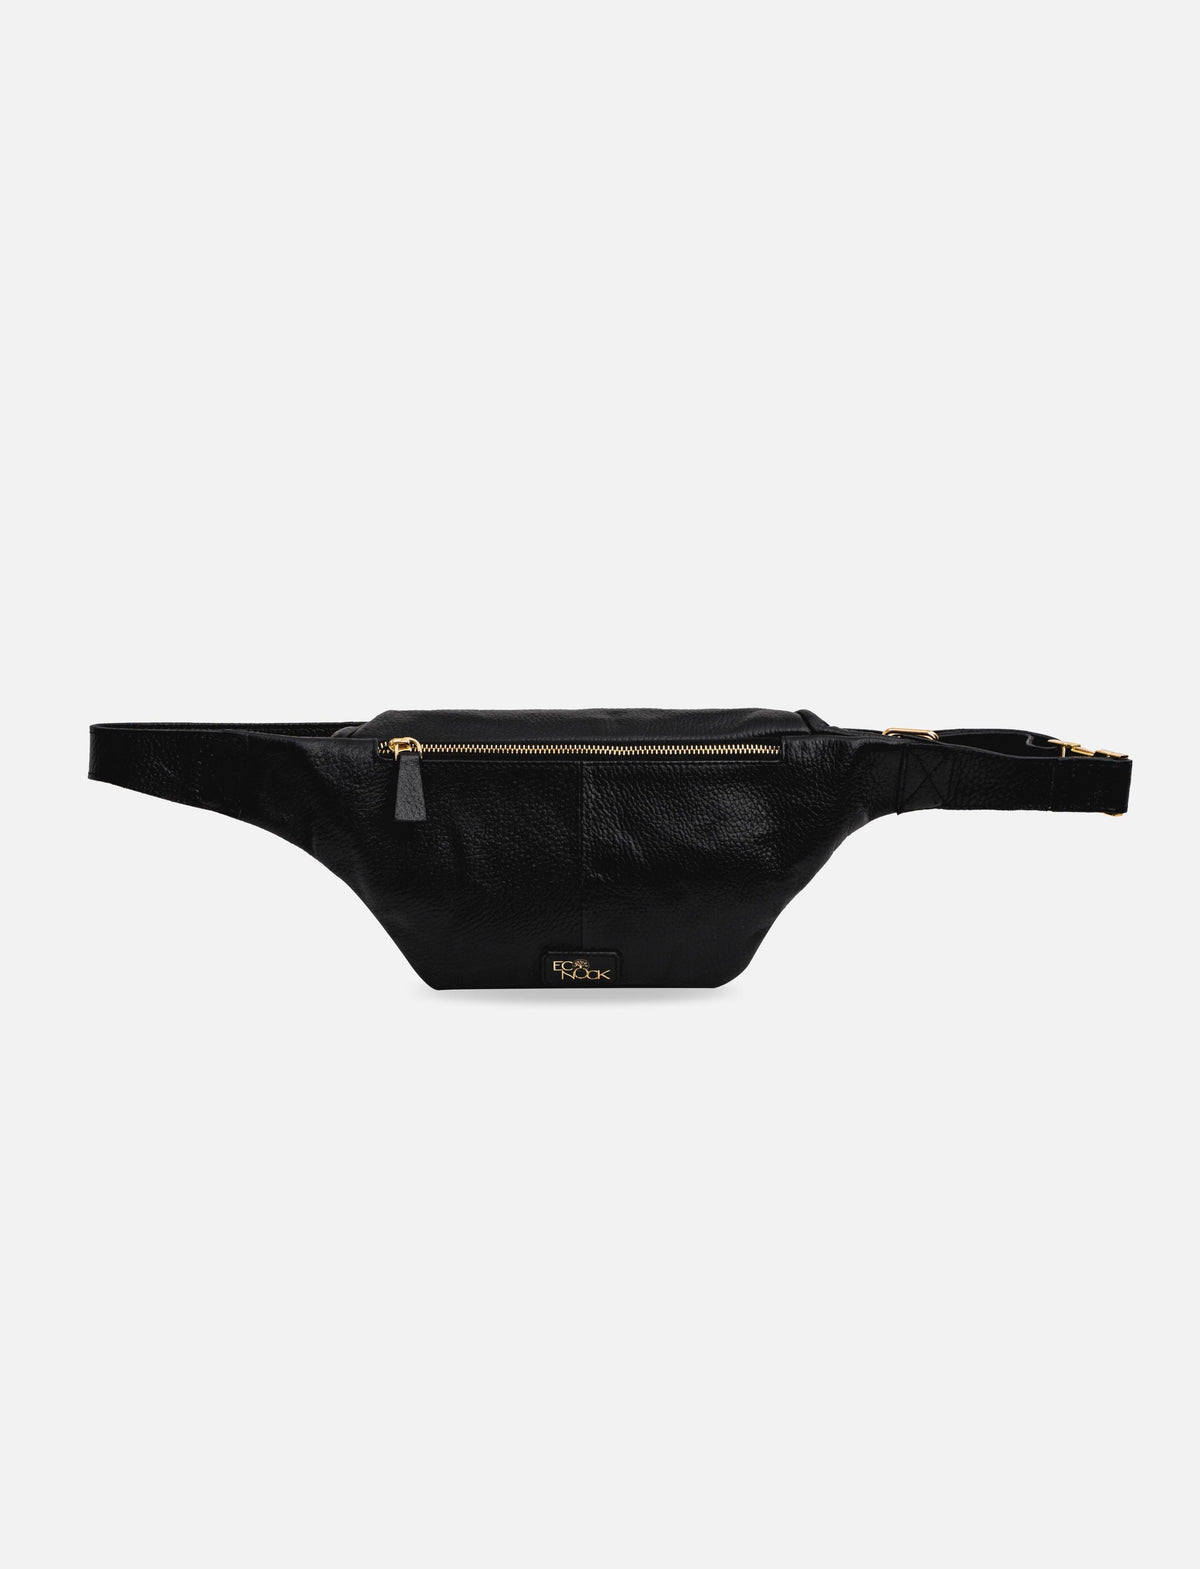 Neo Fanny Pack